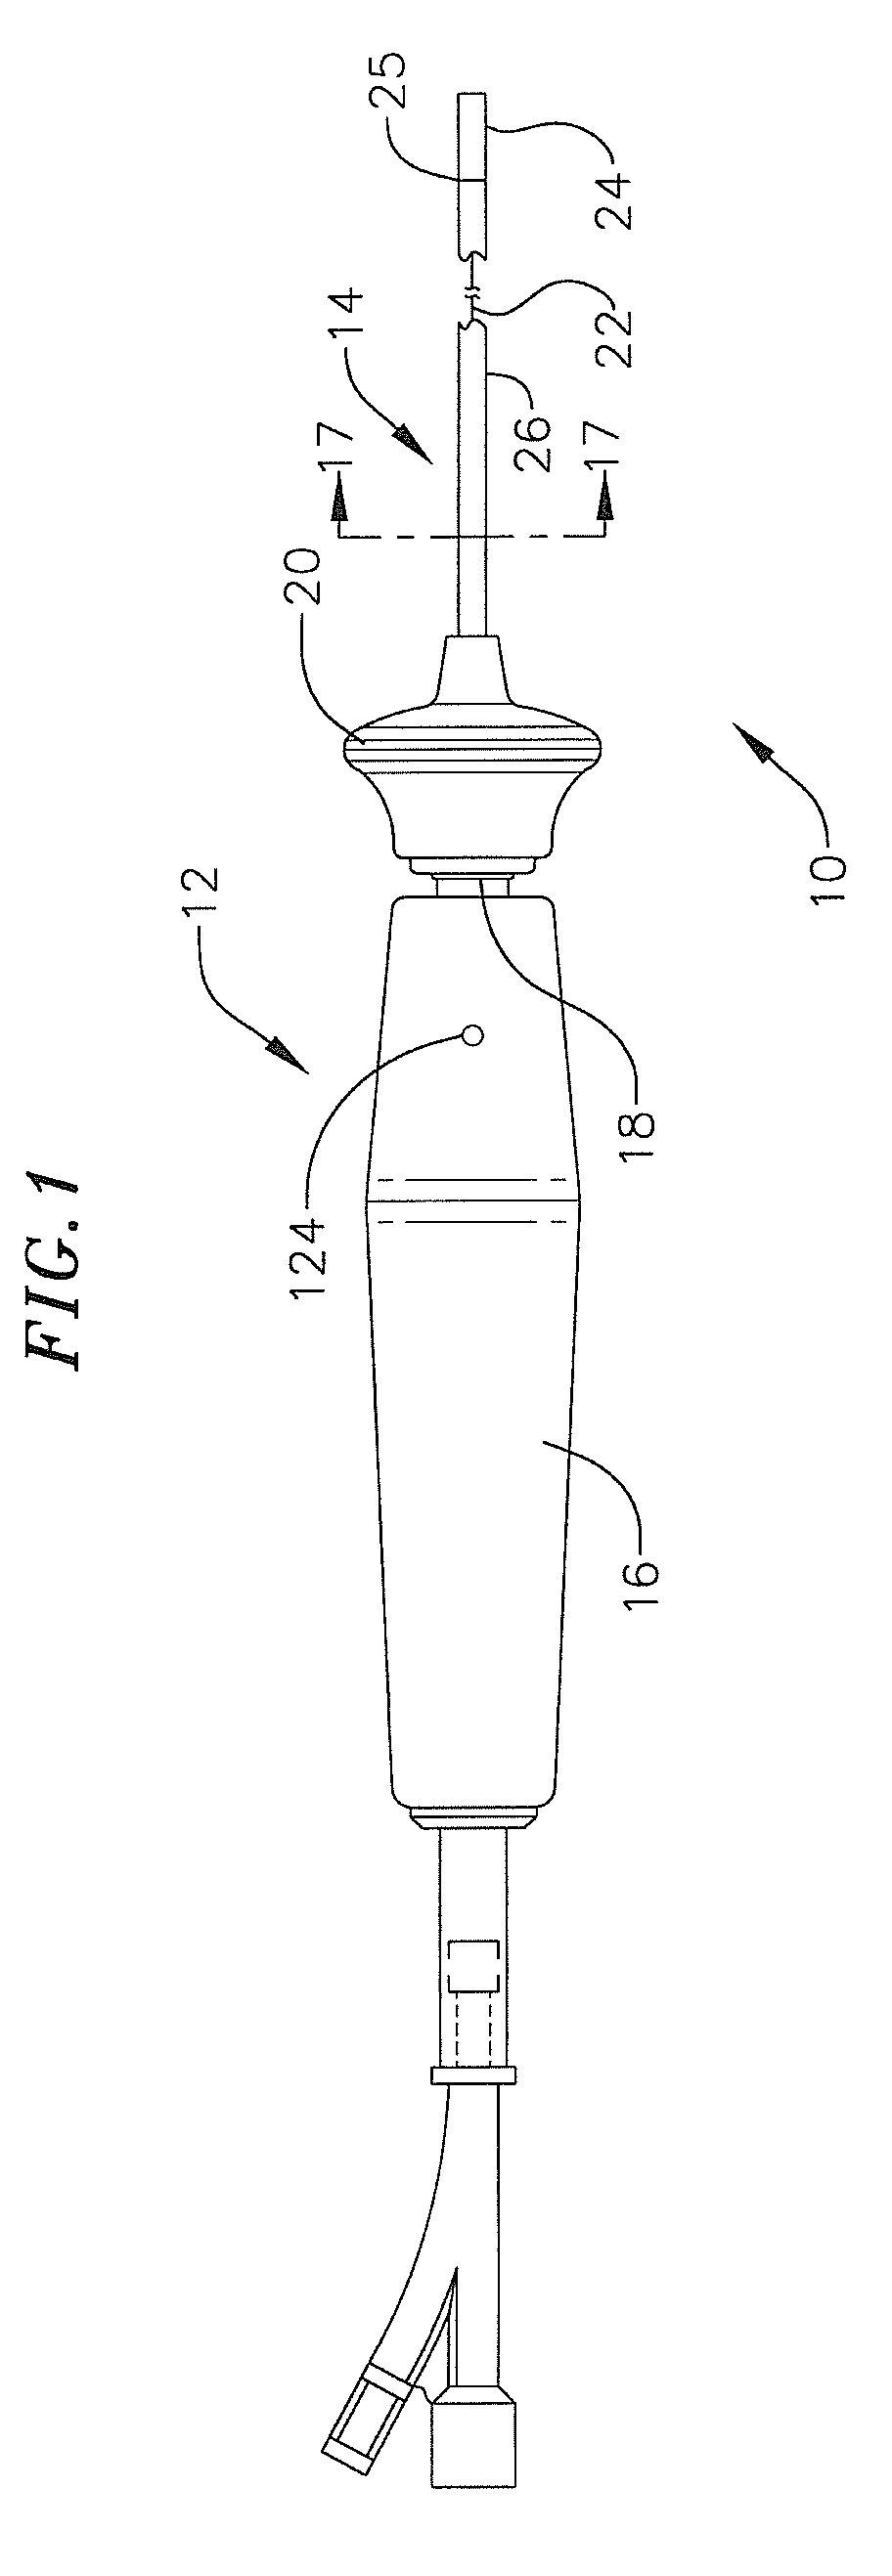 Steerable Device For Introducing Diagnostic And Therapeutic Apparatus Into The Body